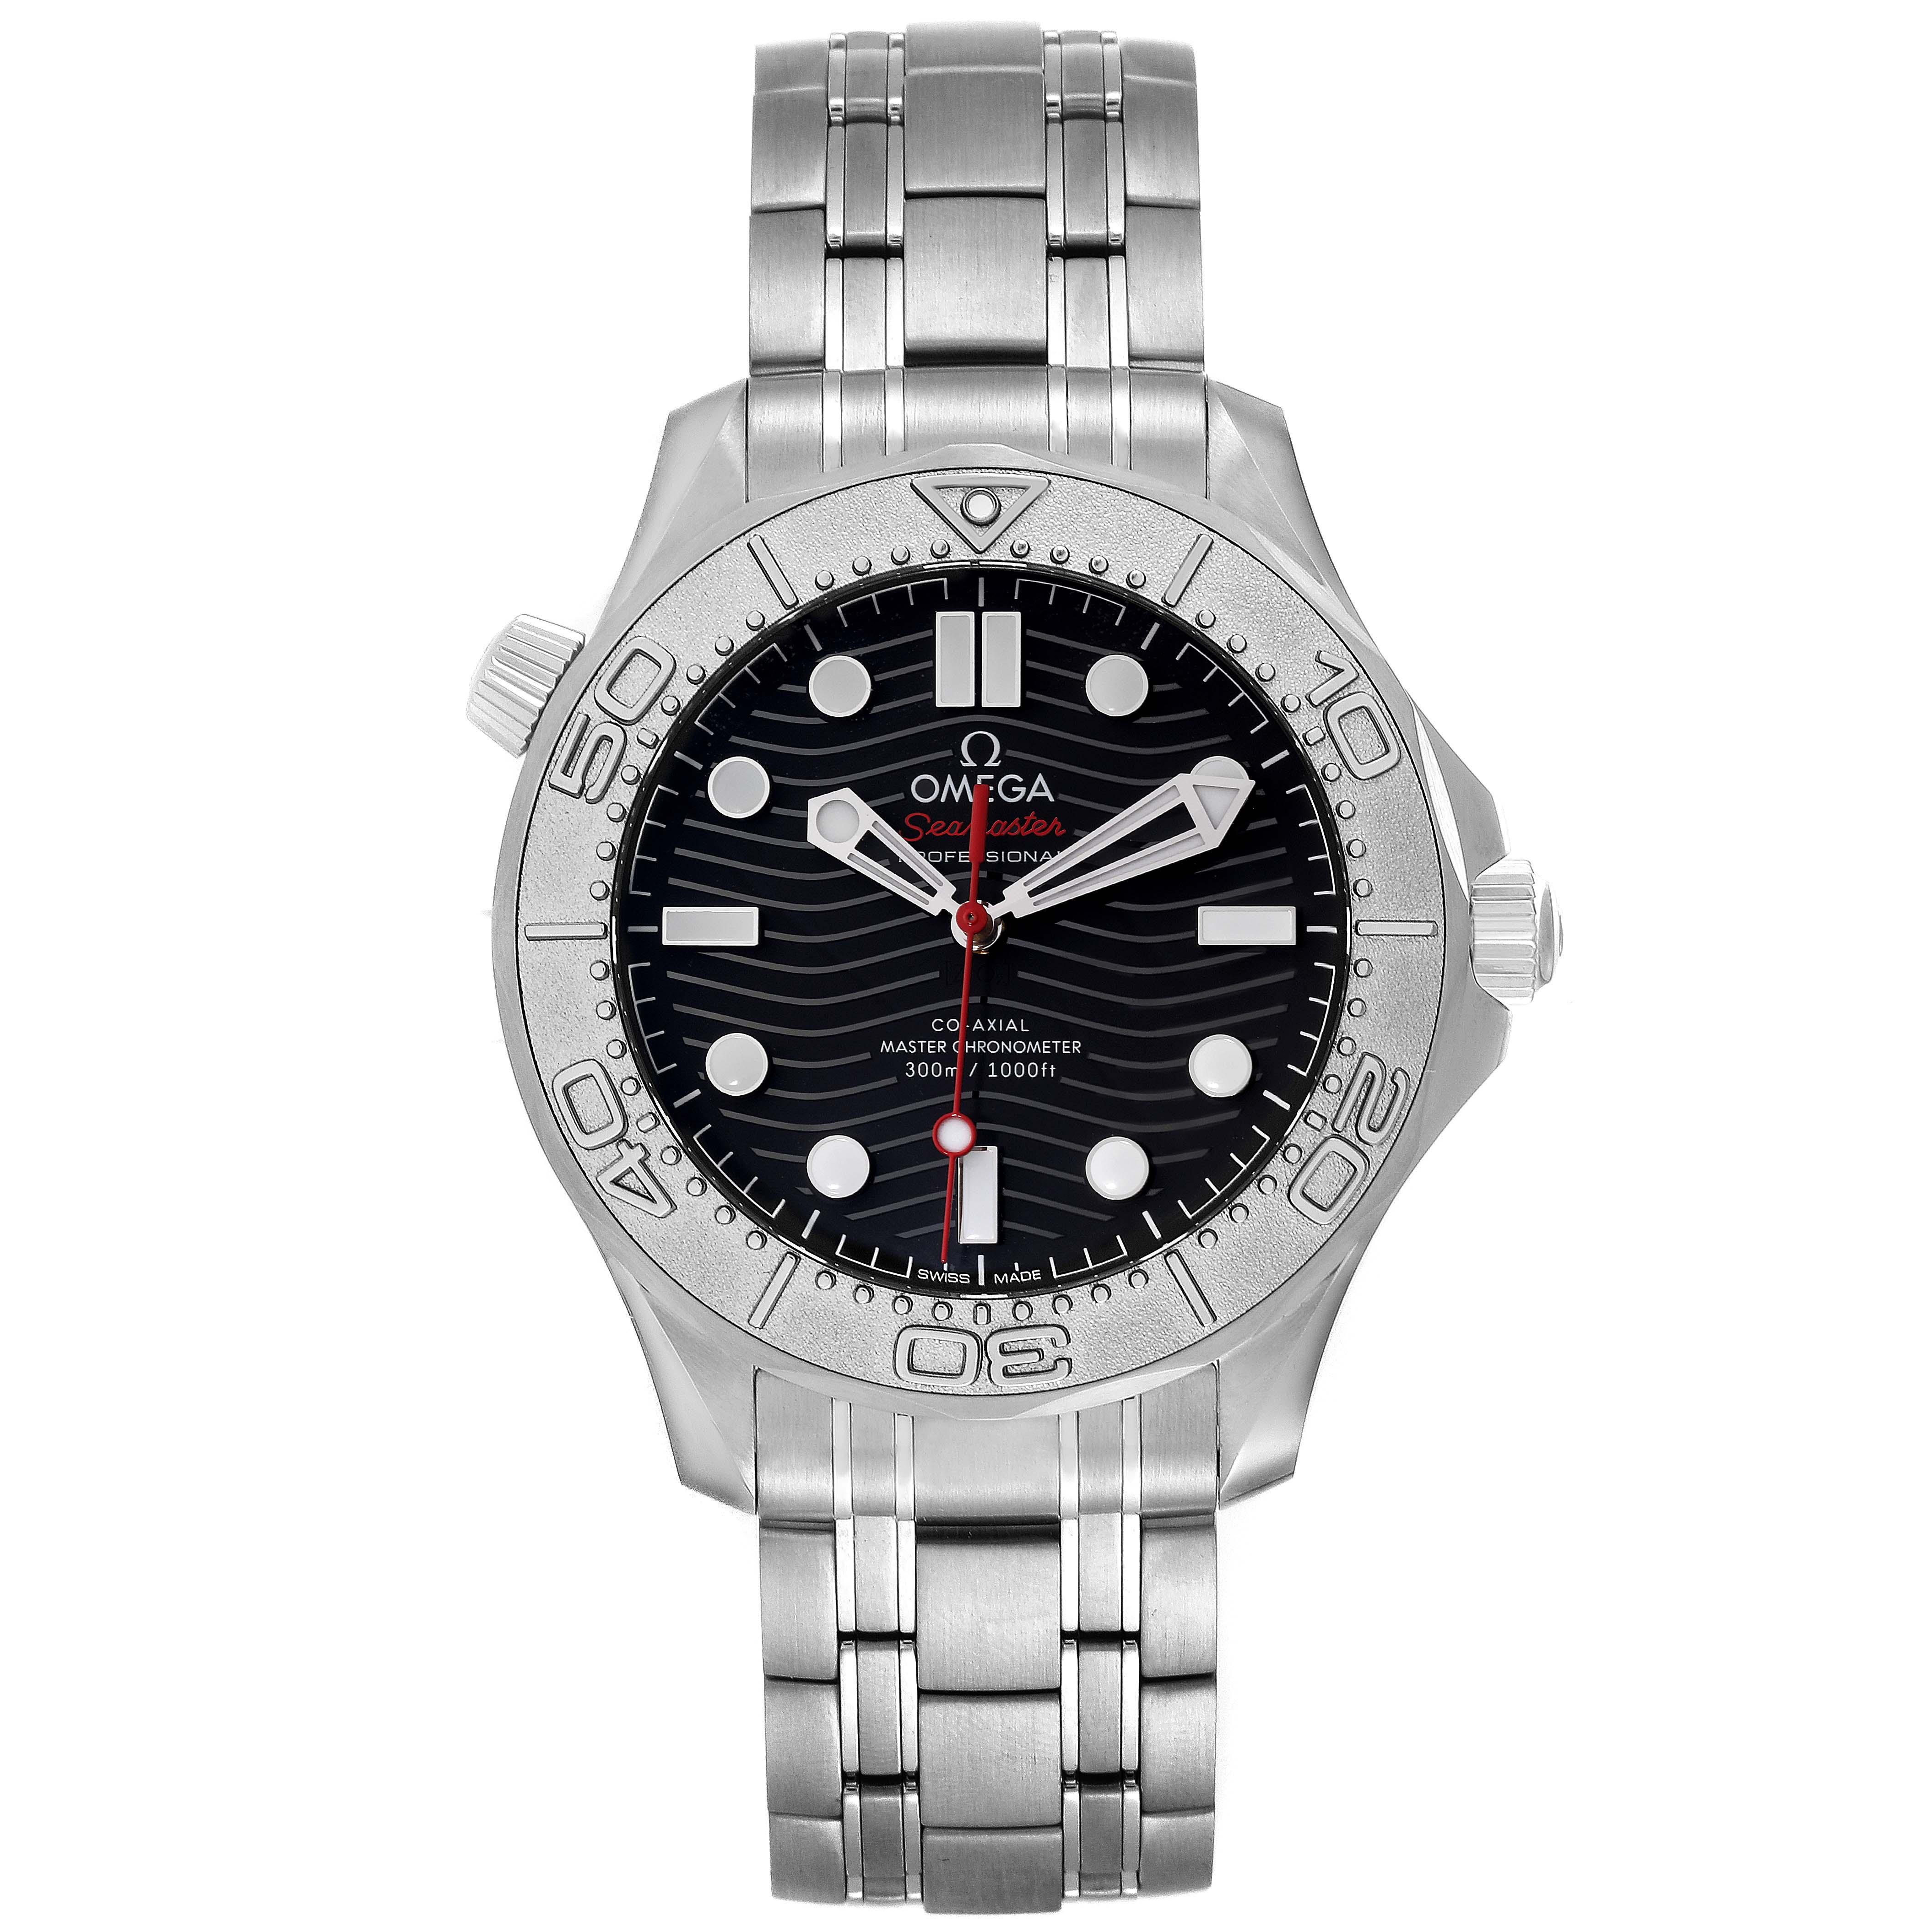 Omega Seamaster Nekton Edition Steel Mens Watch 210.30.42.20.01.002 Unworn. Automatic Self-winding movement with a Co-Axial escapement. Certified Master Chronometer, approved by METAS, resistant to magnetic fields reaching 15,000 gauss. Free